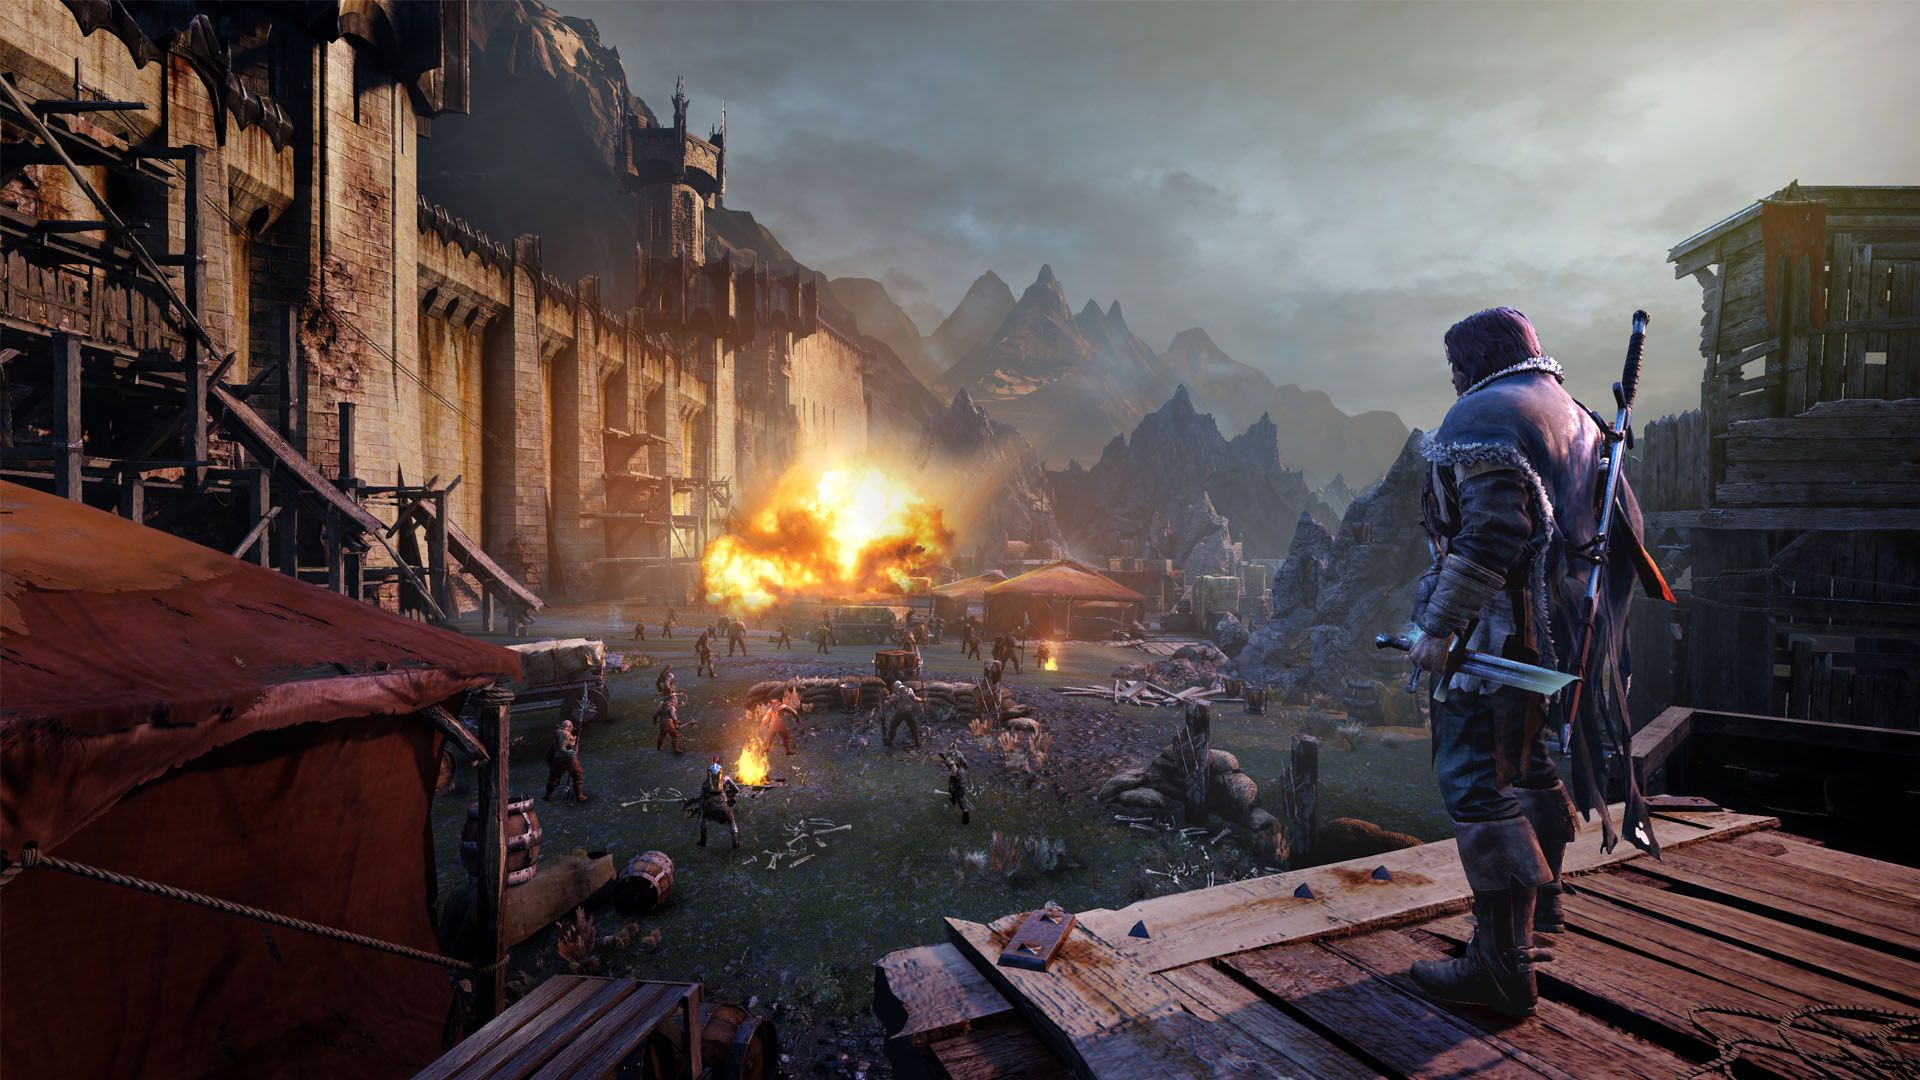 Middle-earth: Shadow of Mordor - Rising Storm Rune Featured Screenshot #1